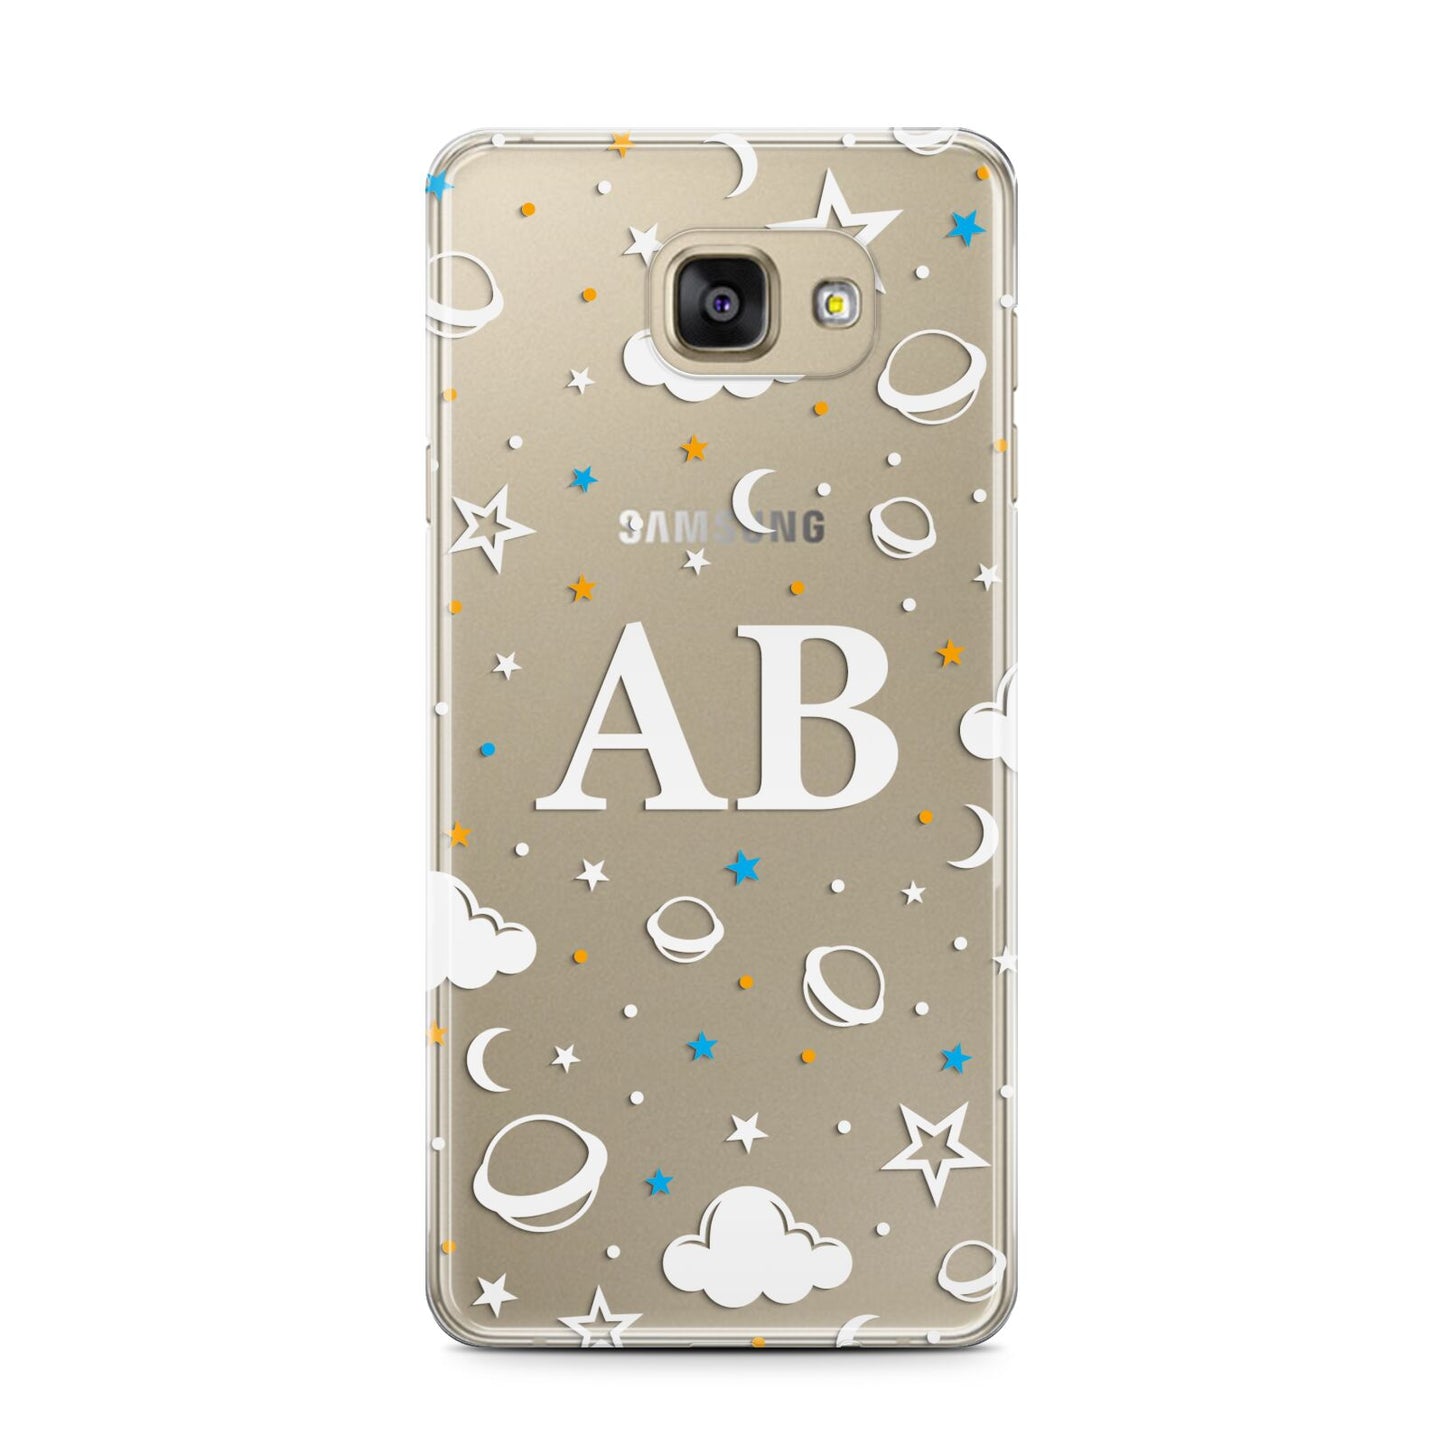 Astronomical Initials Samsung Galaxy A7 2016 Case on gold phone